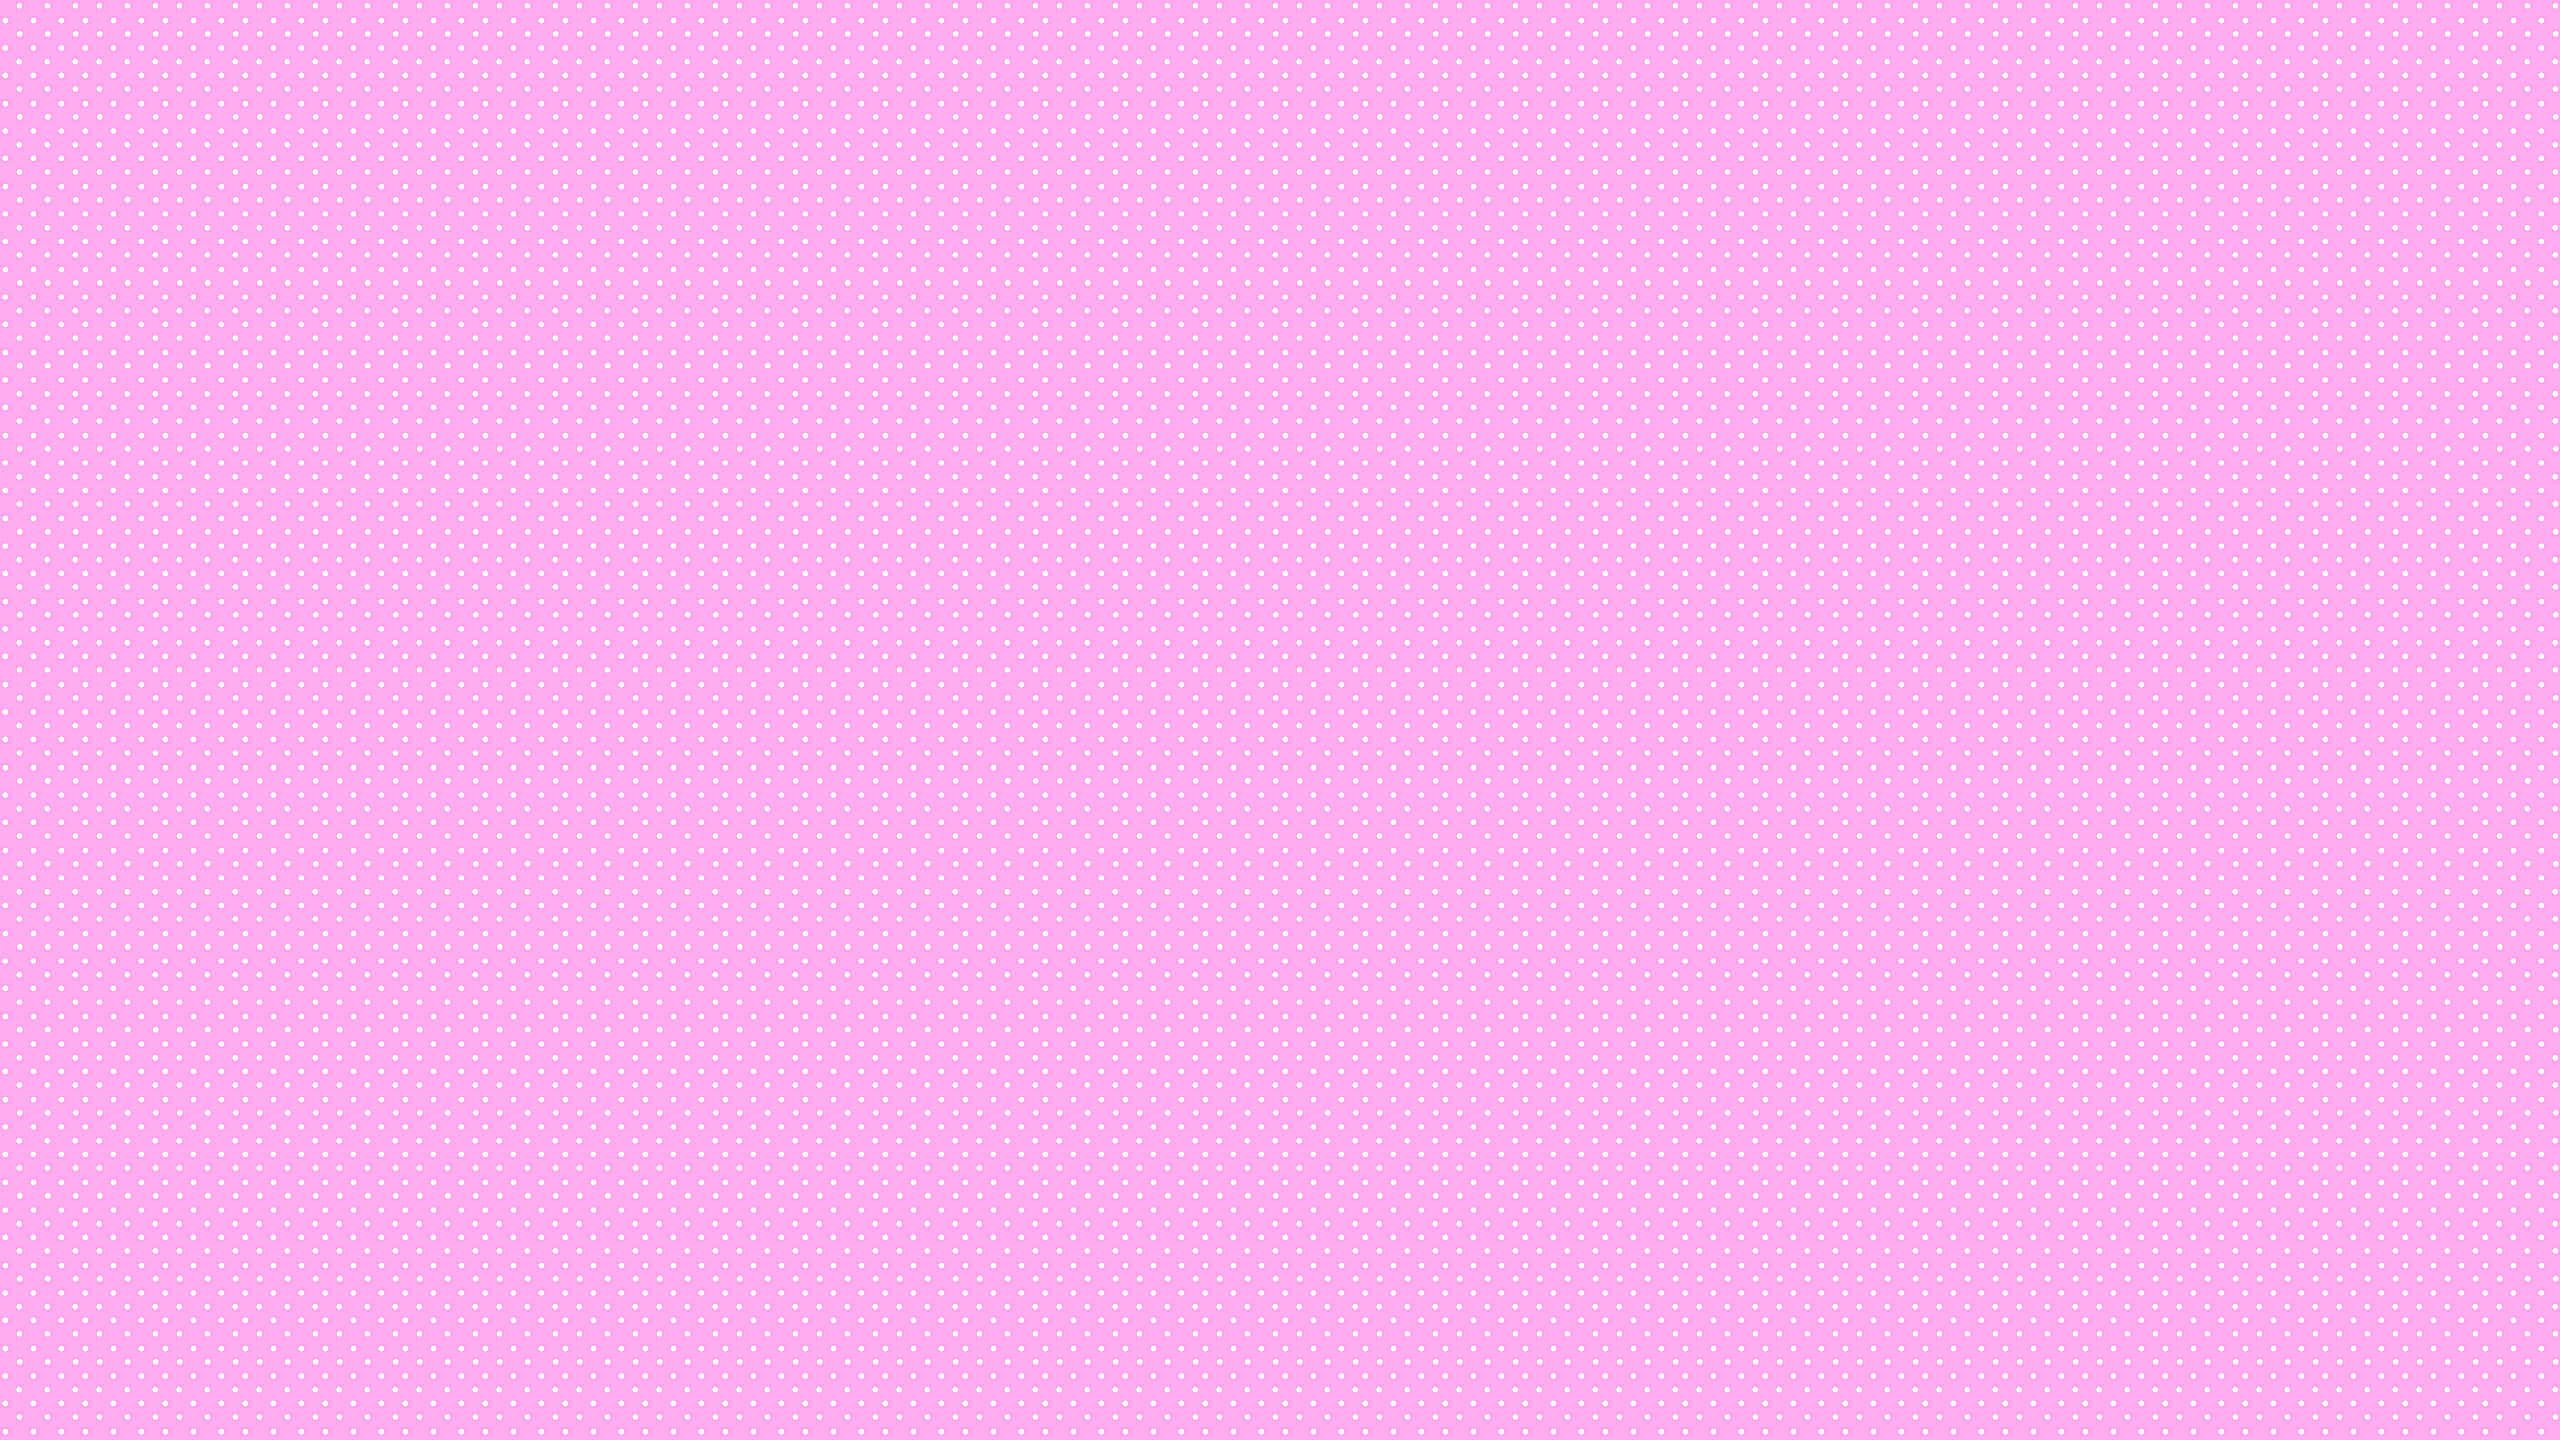 Download A Pink Background With A White Background Wallpaper ...